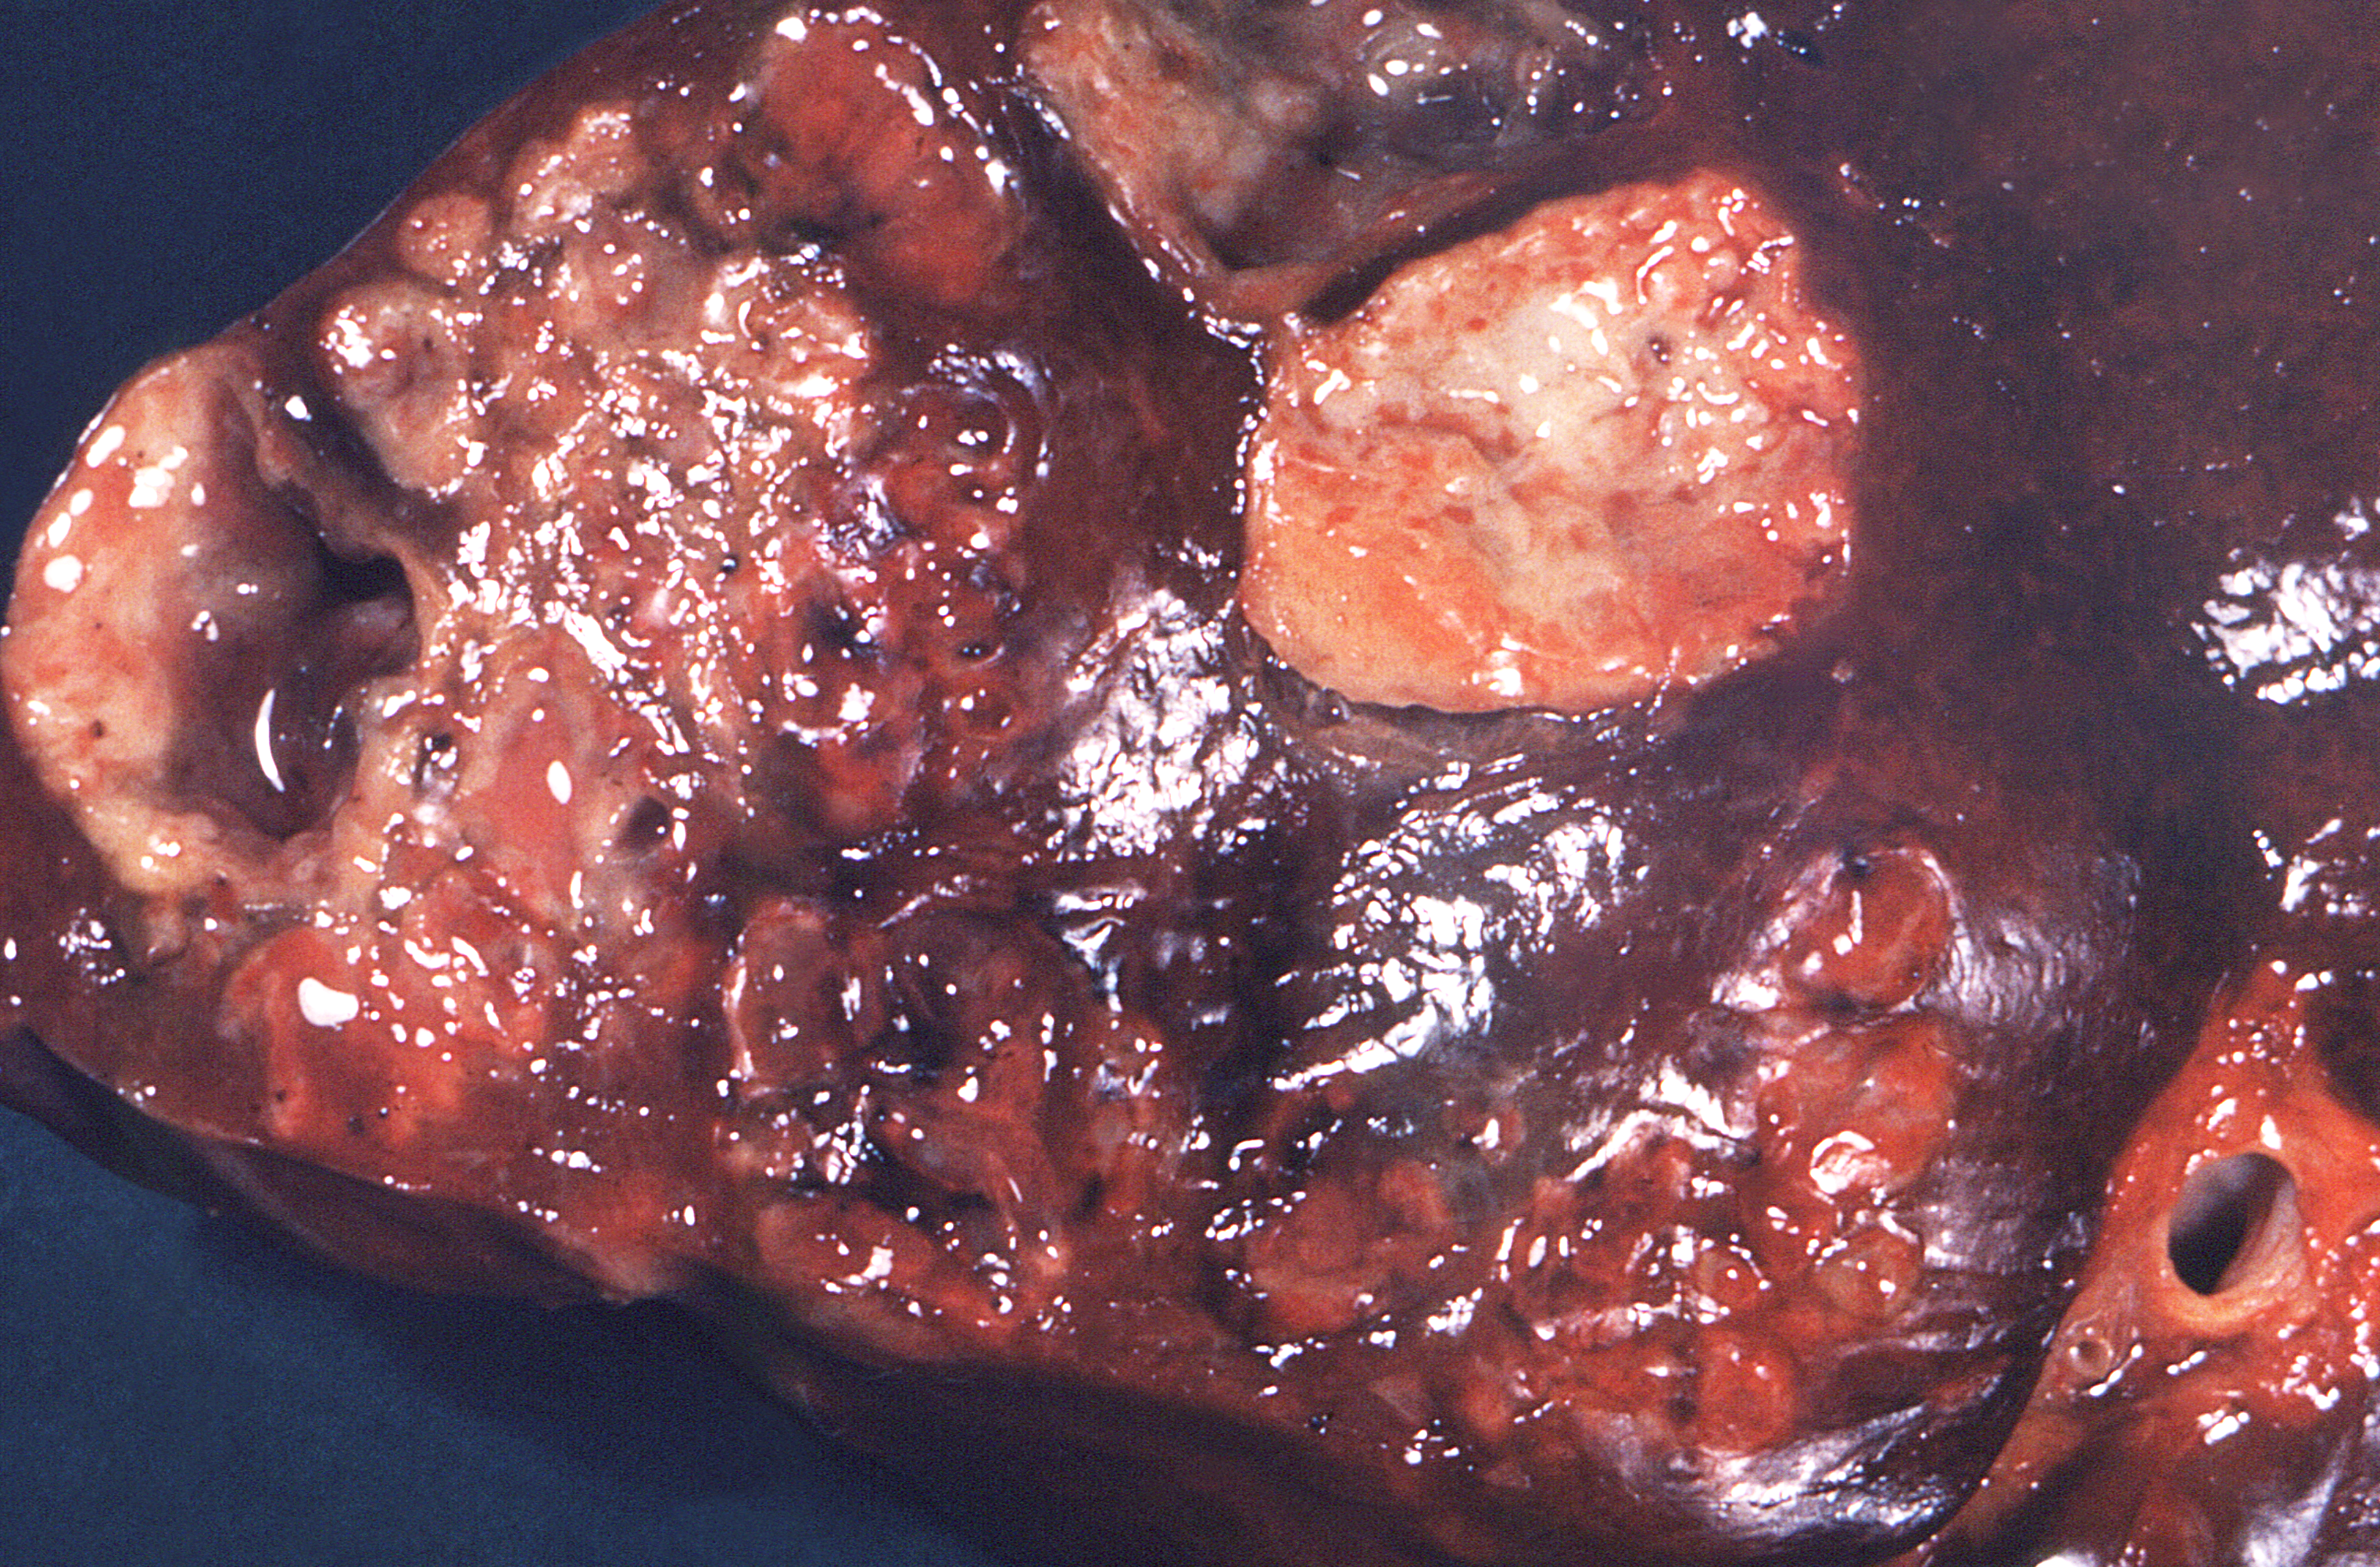 This cut section of human liver, revealed the presence of numerous suppurative, or pus containing lesions due to an infection known as actinomycosis, caused by the Gram-positive, fungus-like, aerobic bacteria of the order Actinomycetales. Actinomycosis, or mycetoma, is a slowly progressive, destructive infection of the cutaneous and subcutaneous tissues, fascia, and can progress to a point, where it can affect bone and other organs, including the liver, as in this case.